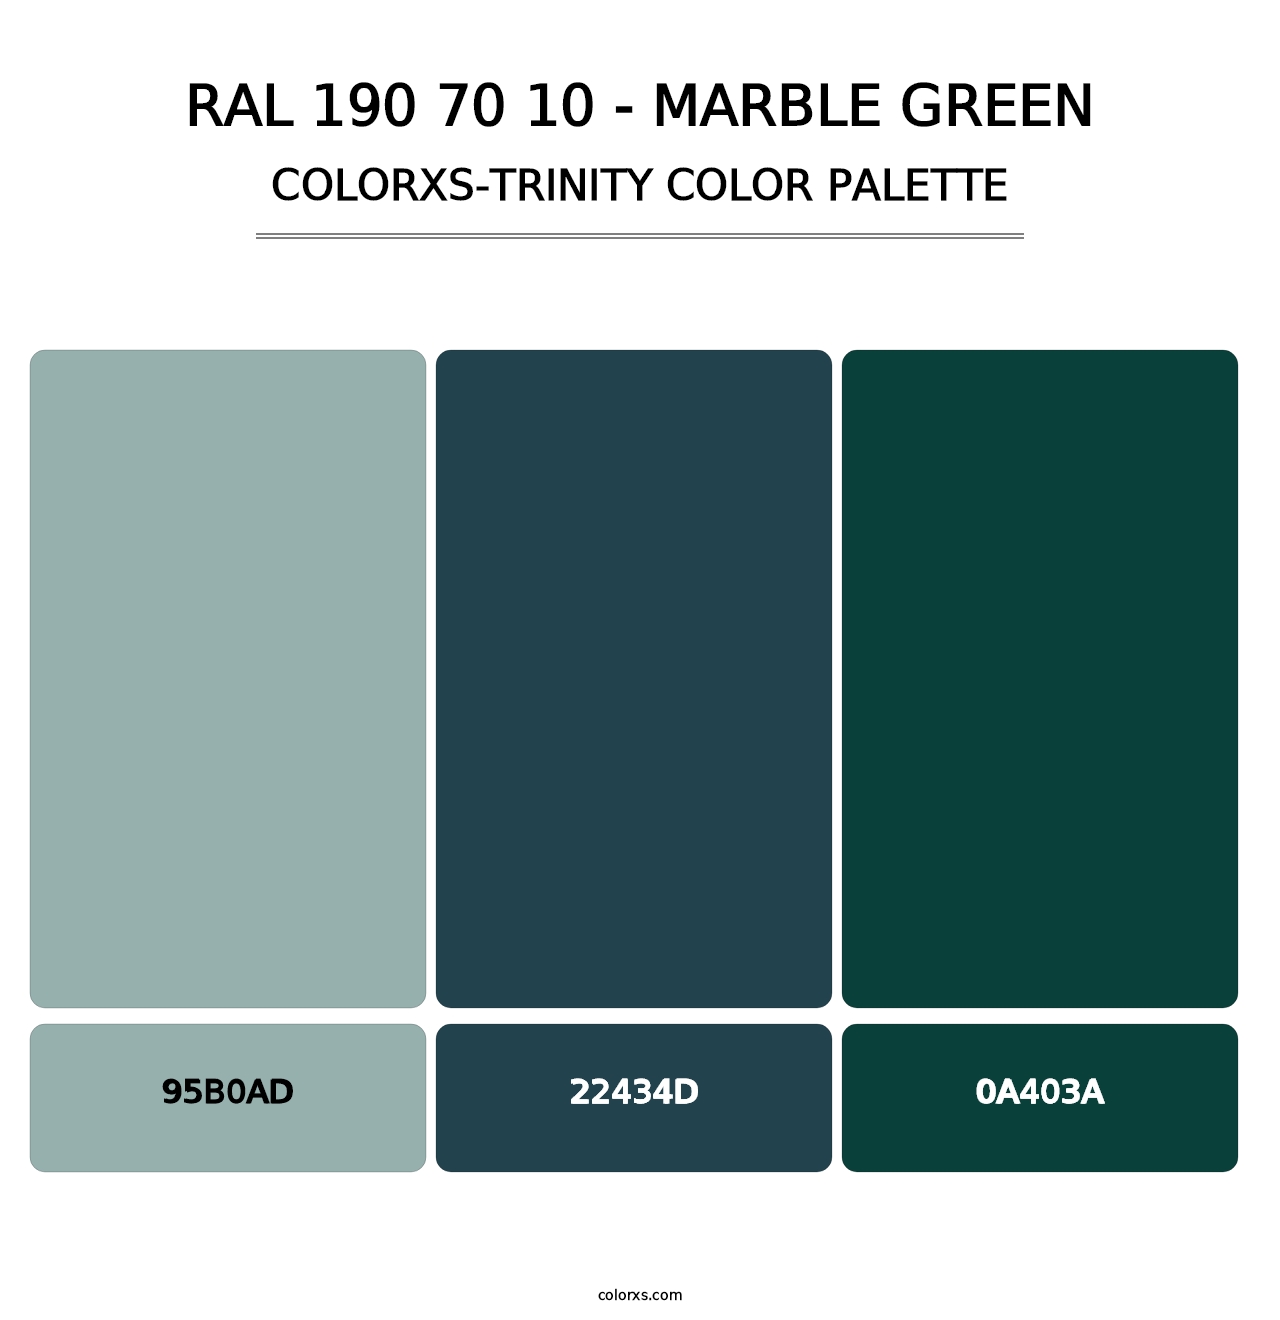 RAL 190 70 10 - Marble Green - Colorxs Trinity Palette